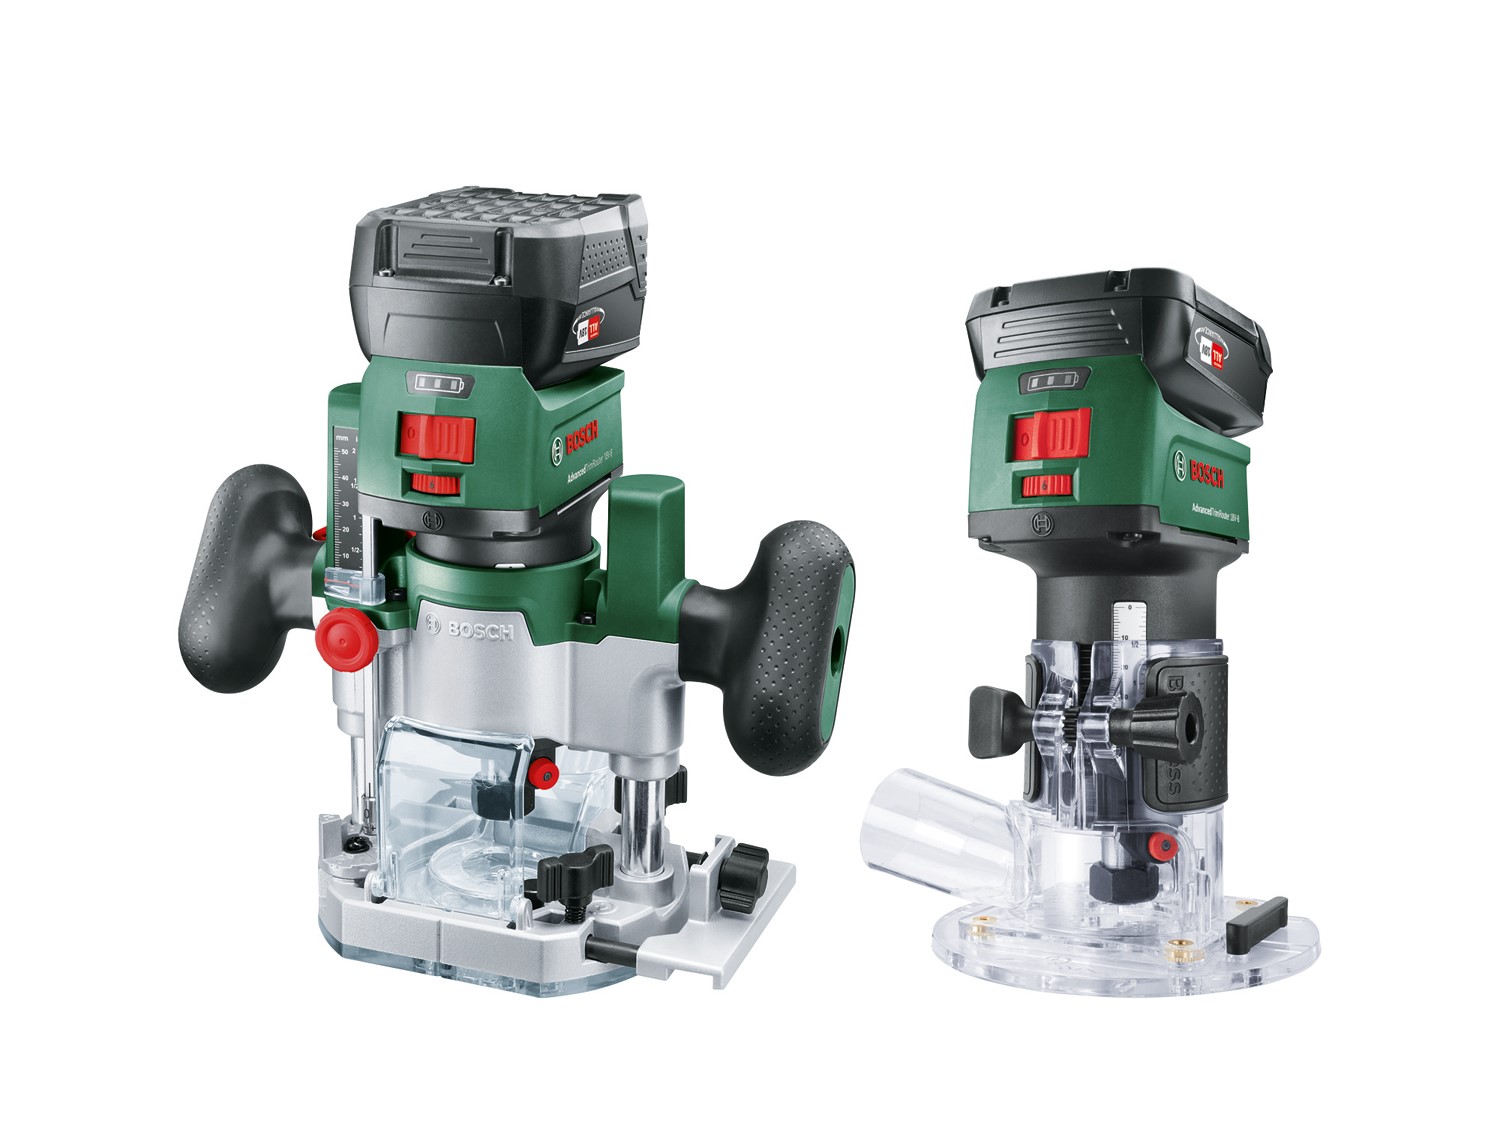 Transforms cordless trim router to plunge router: New router plunge base from Bosch for DIYers